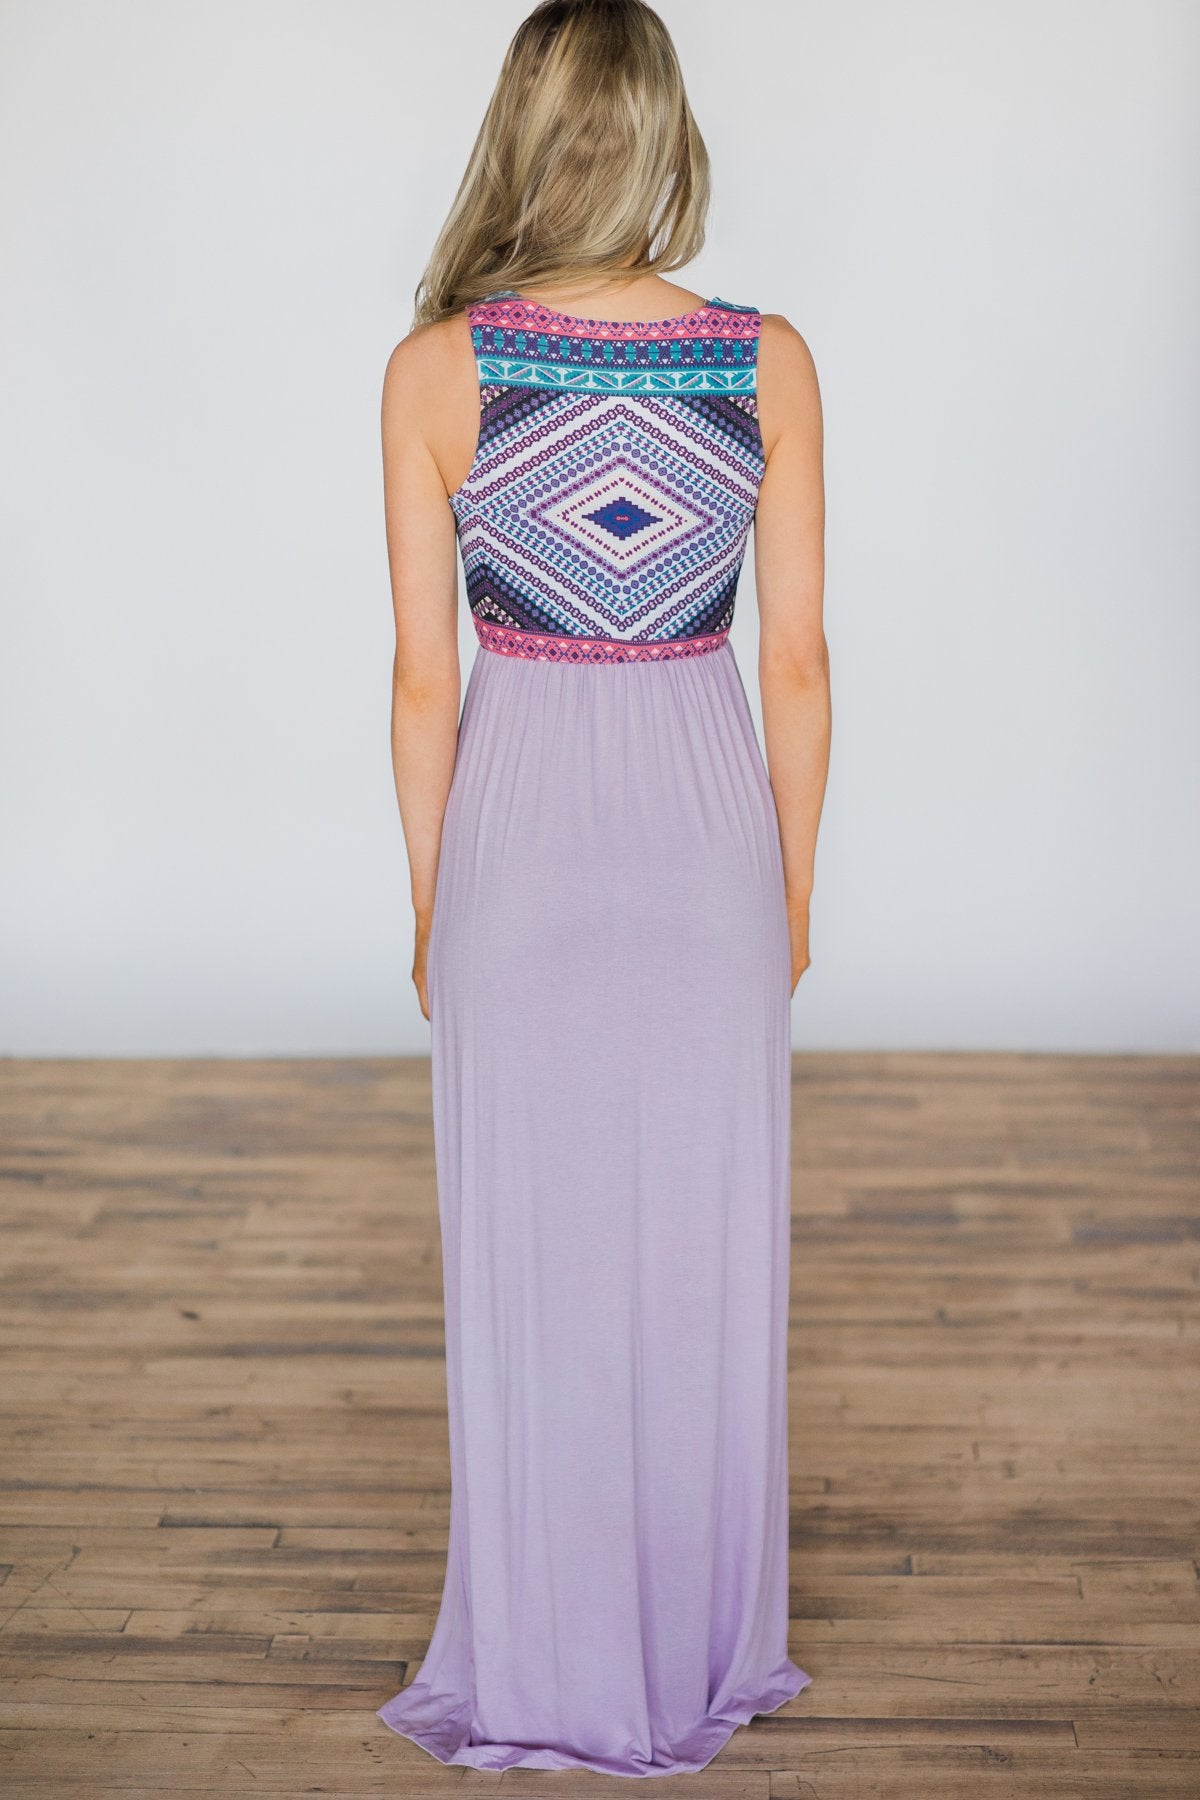 Looking for Love Lavender Maxi Dress